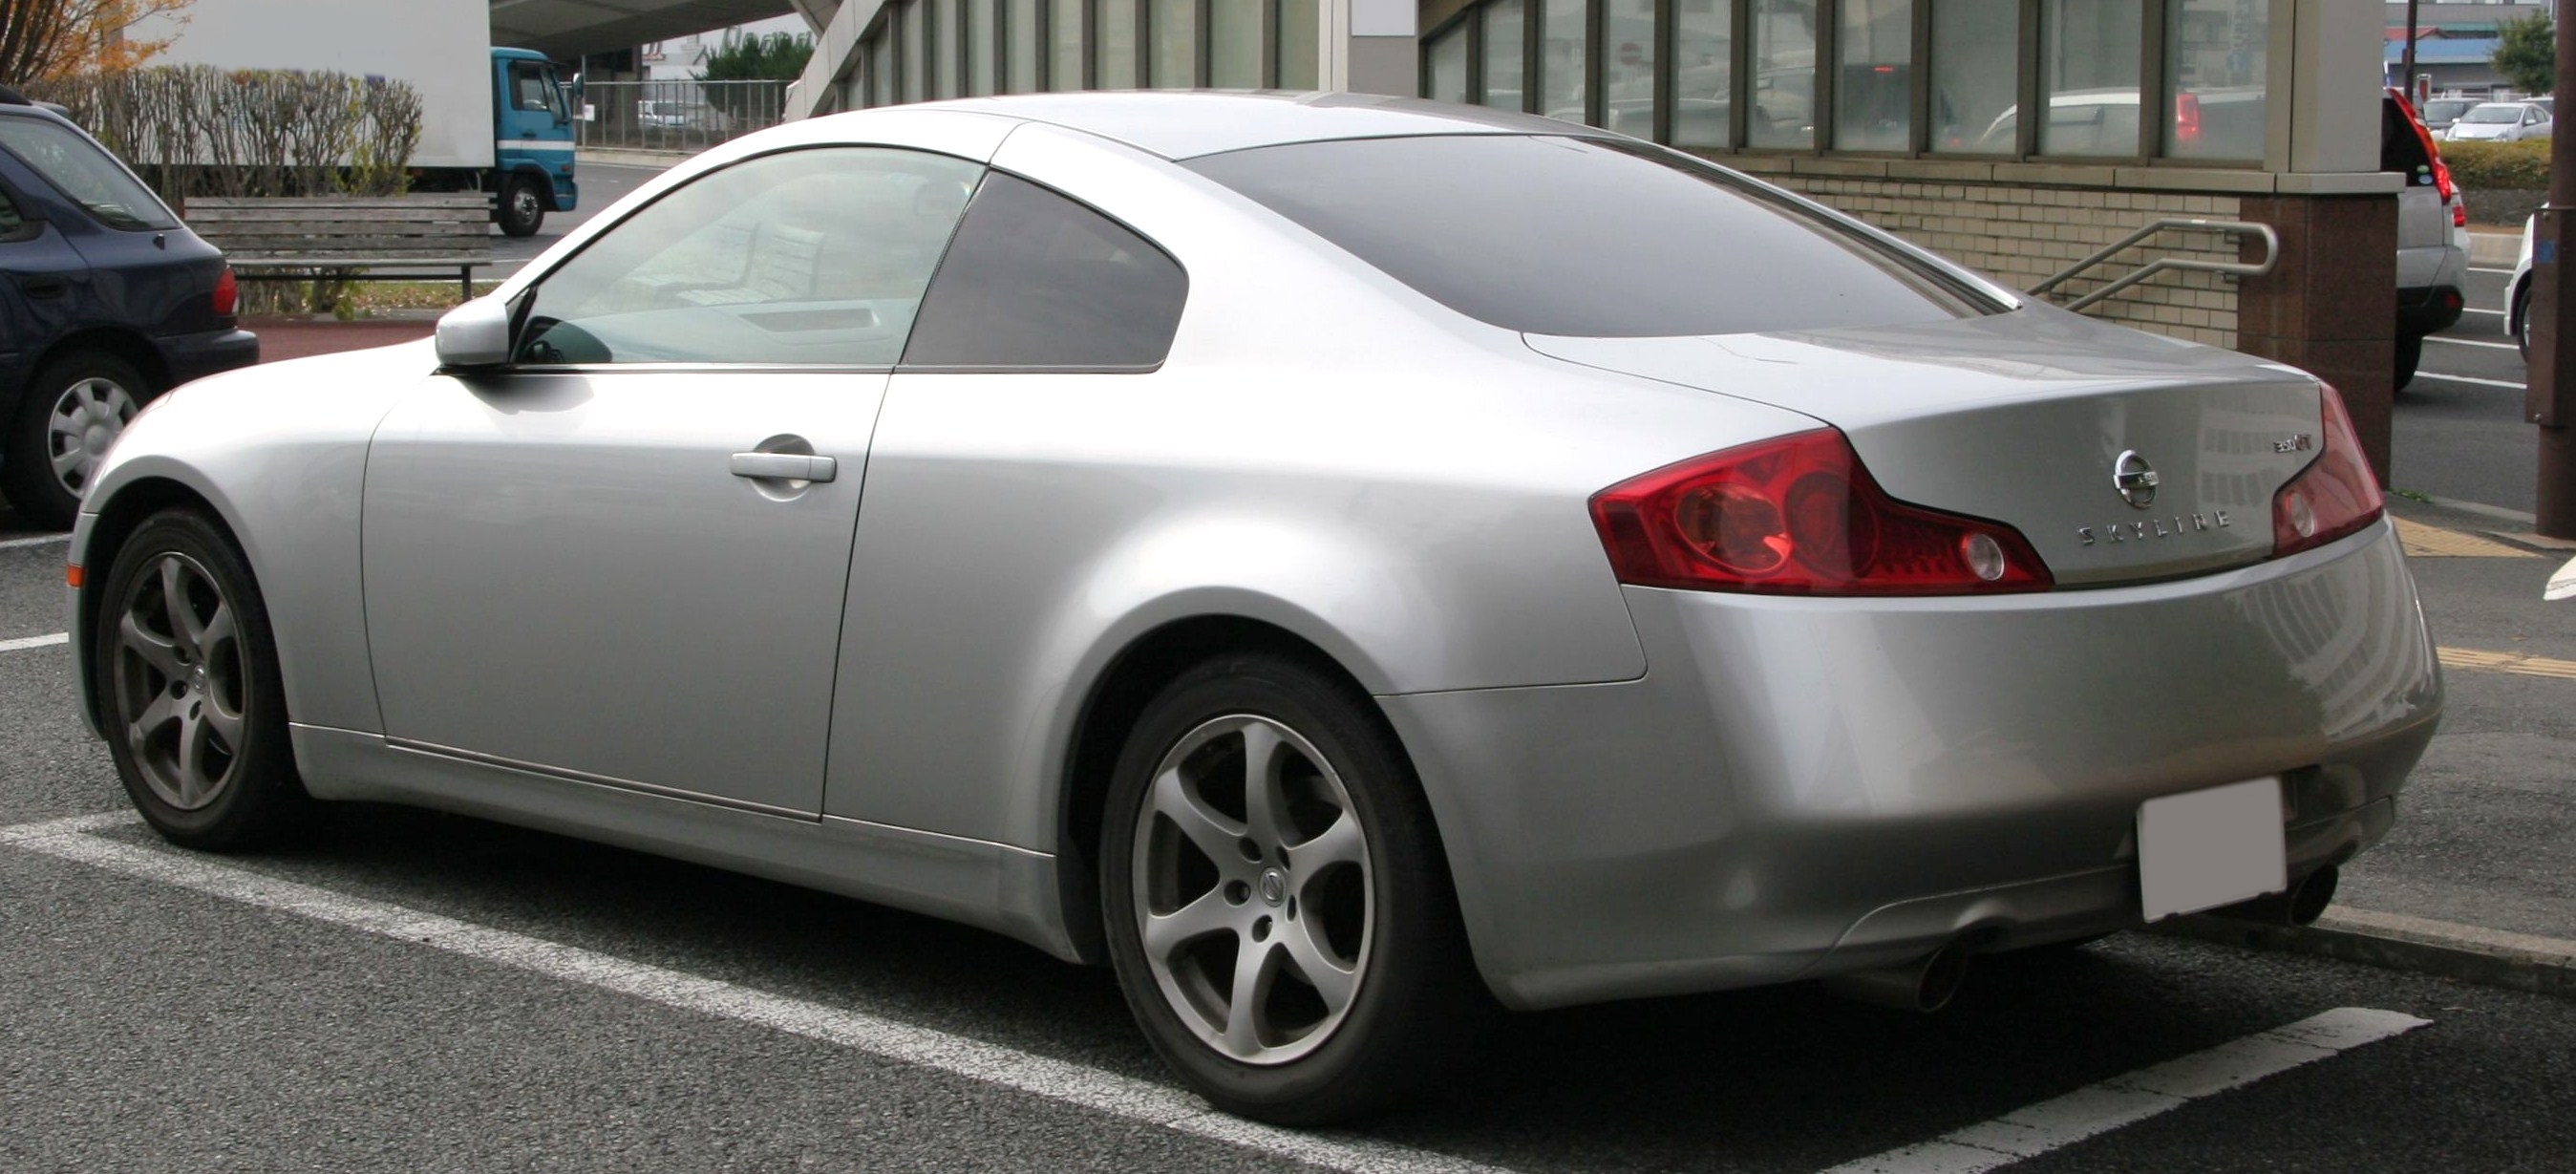 File:2003-2005 NISSAN SKYLINE COUPE 5AT rear.jpg